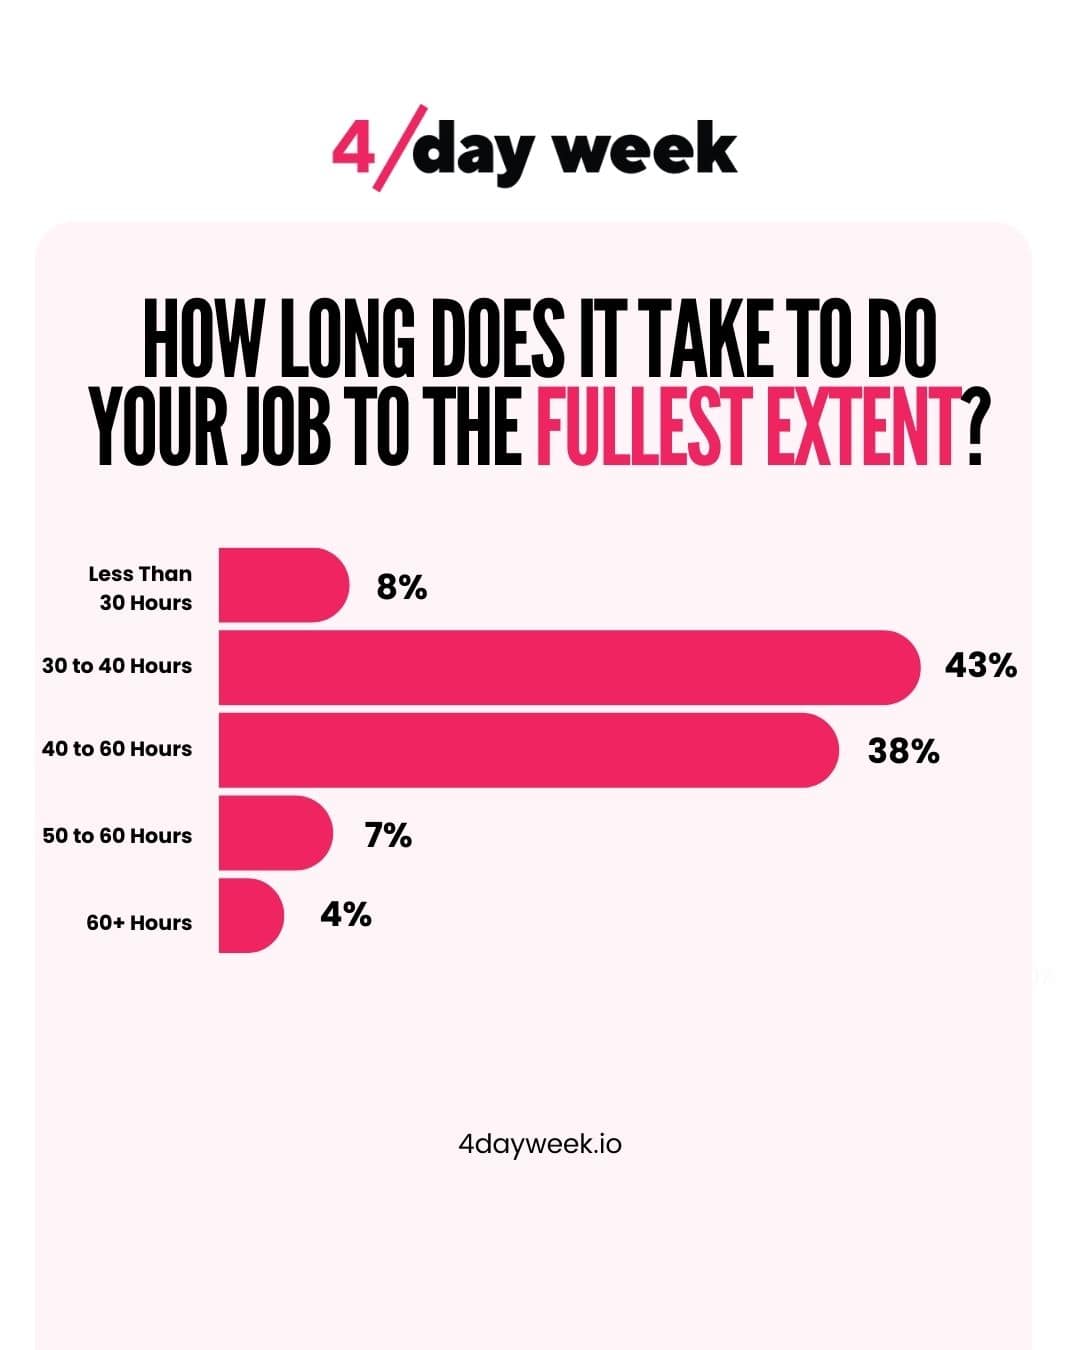 How Long Does it Take to Do Your Job to the Fullest Extent?
